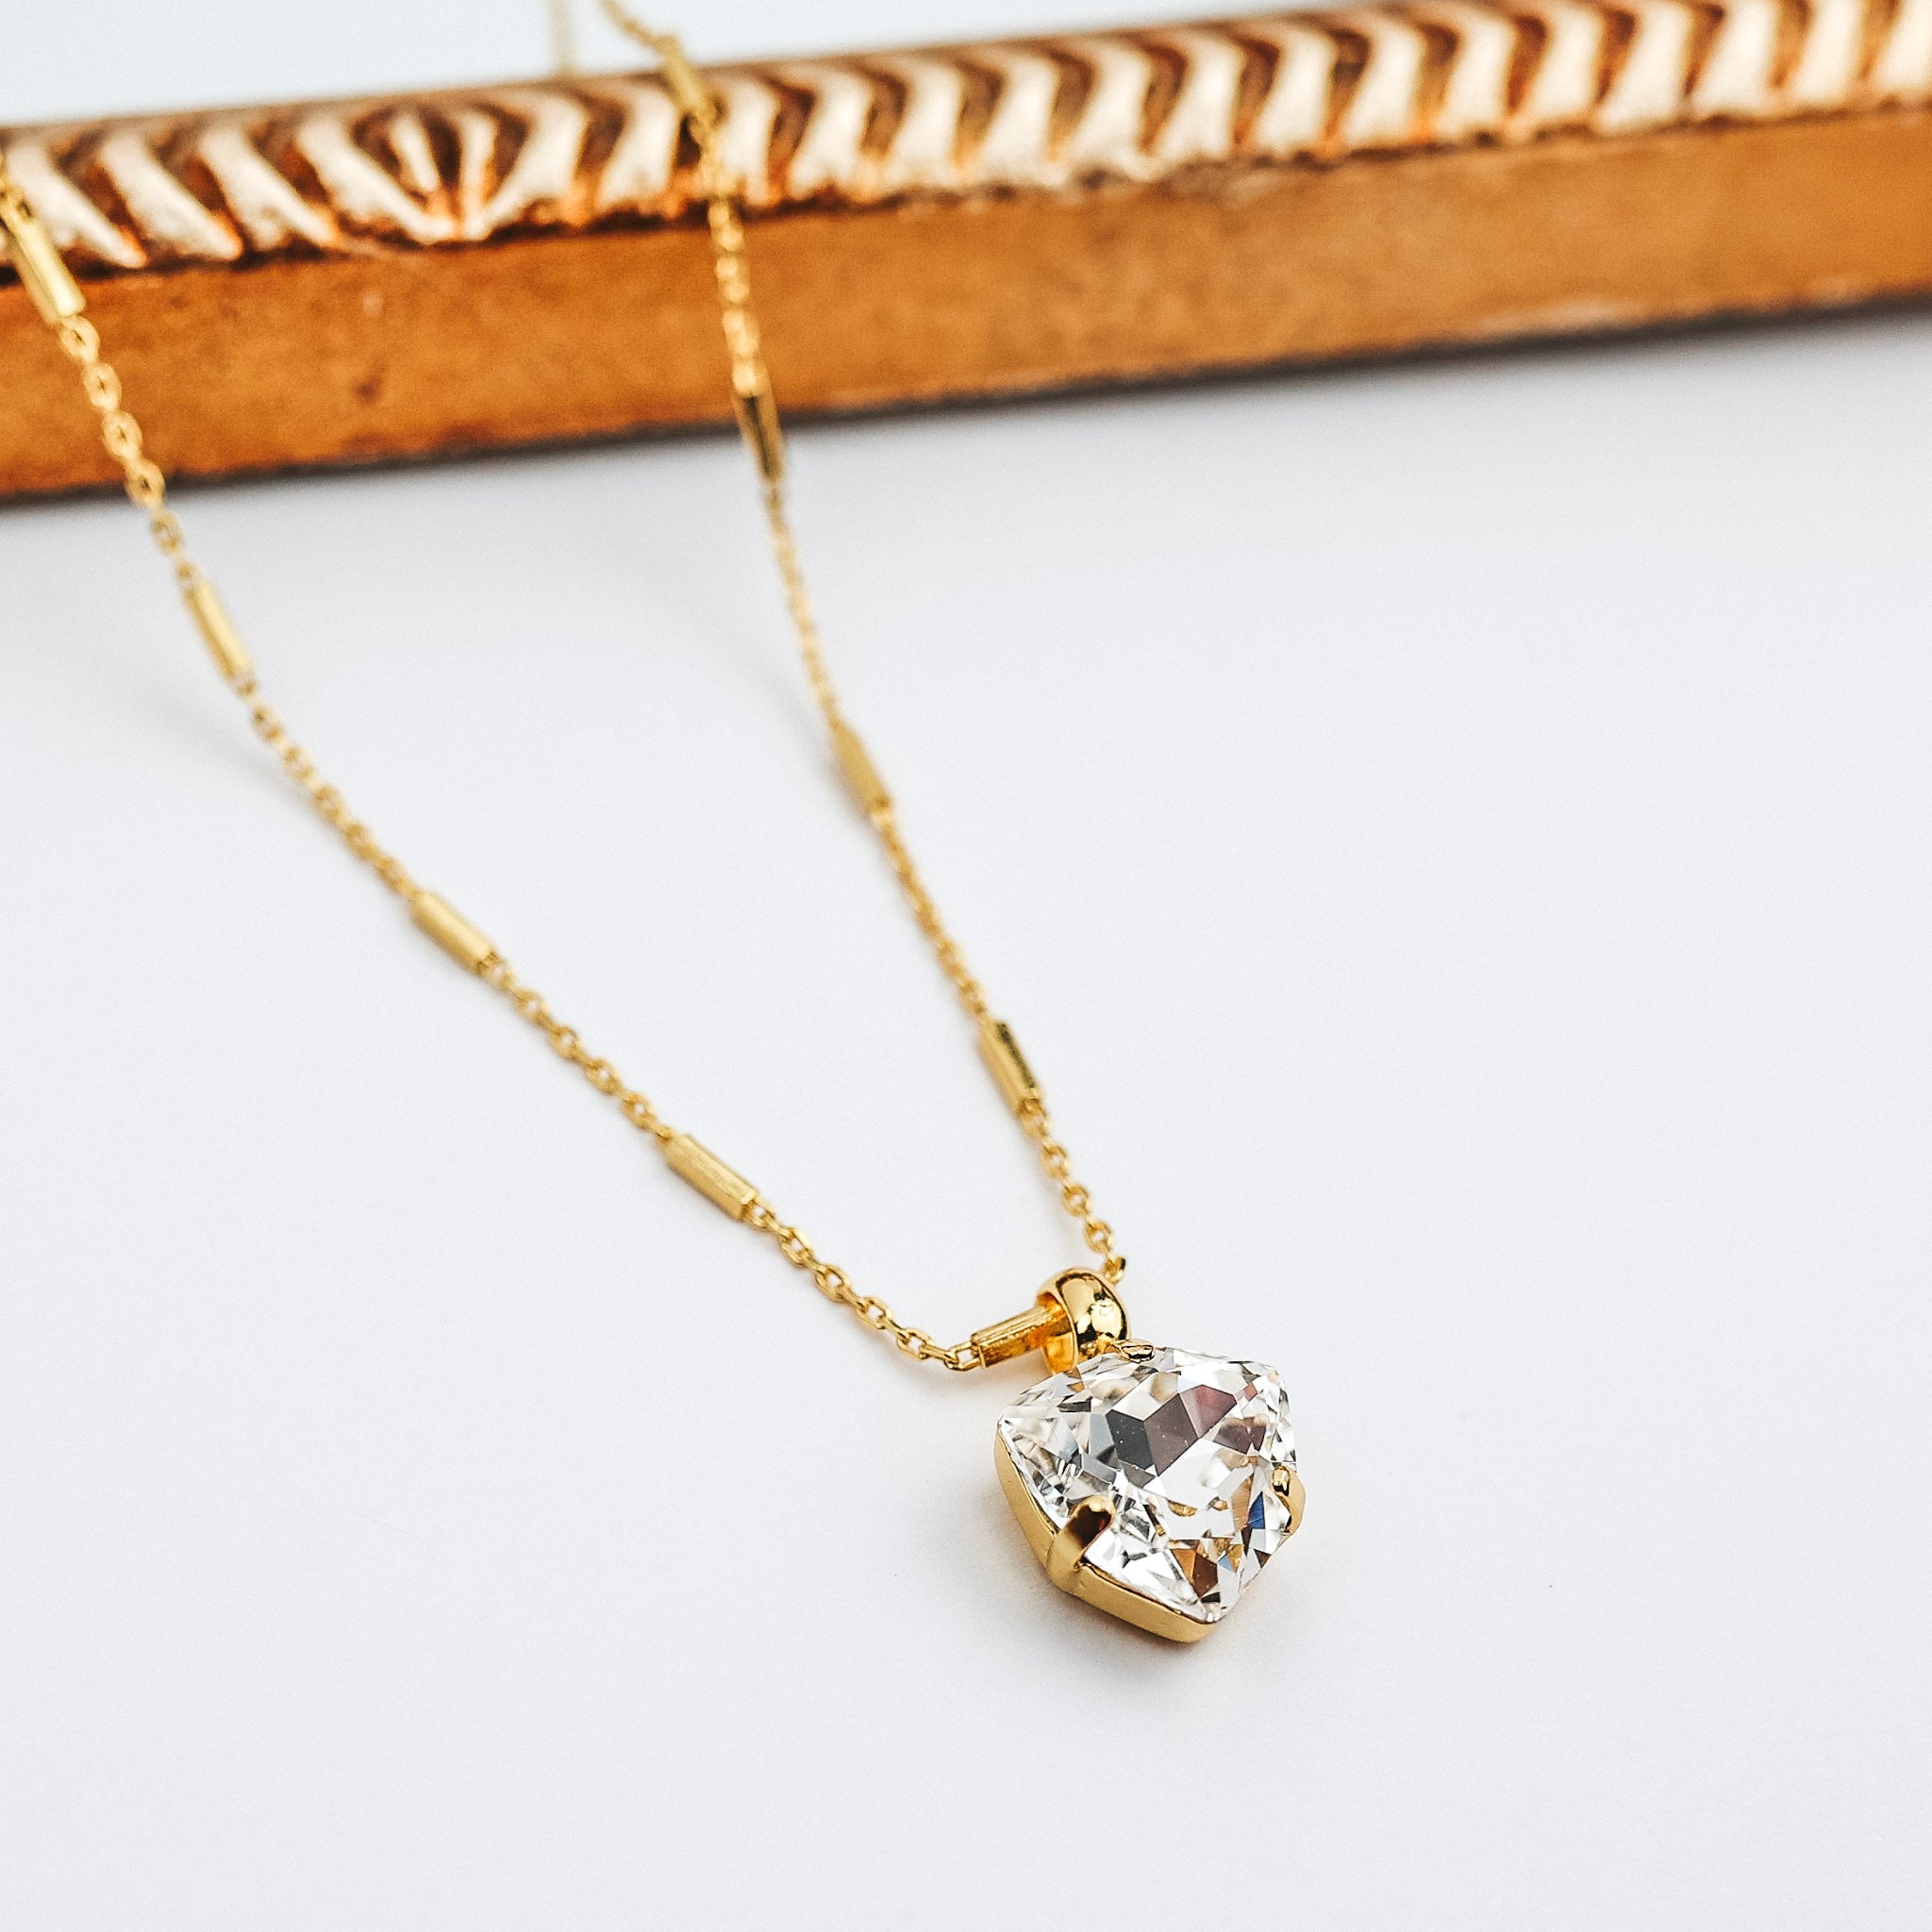 A gold-tone chain necklace with a triangular cut crystal pendant. This necklace is pictured on a white background with a mirror.